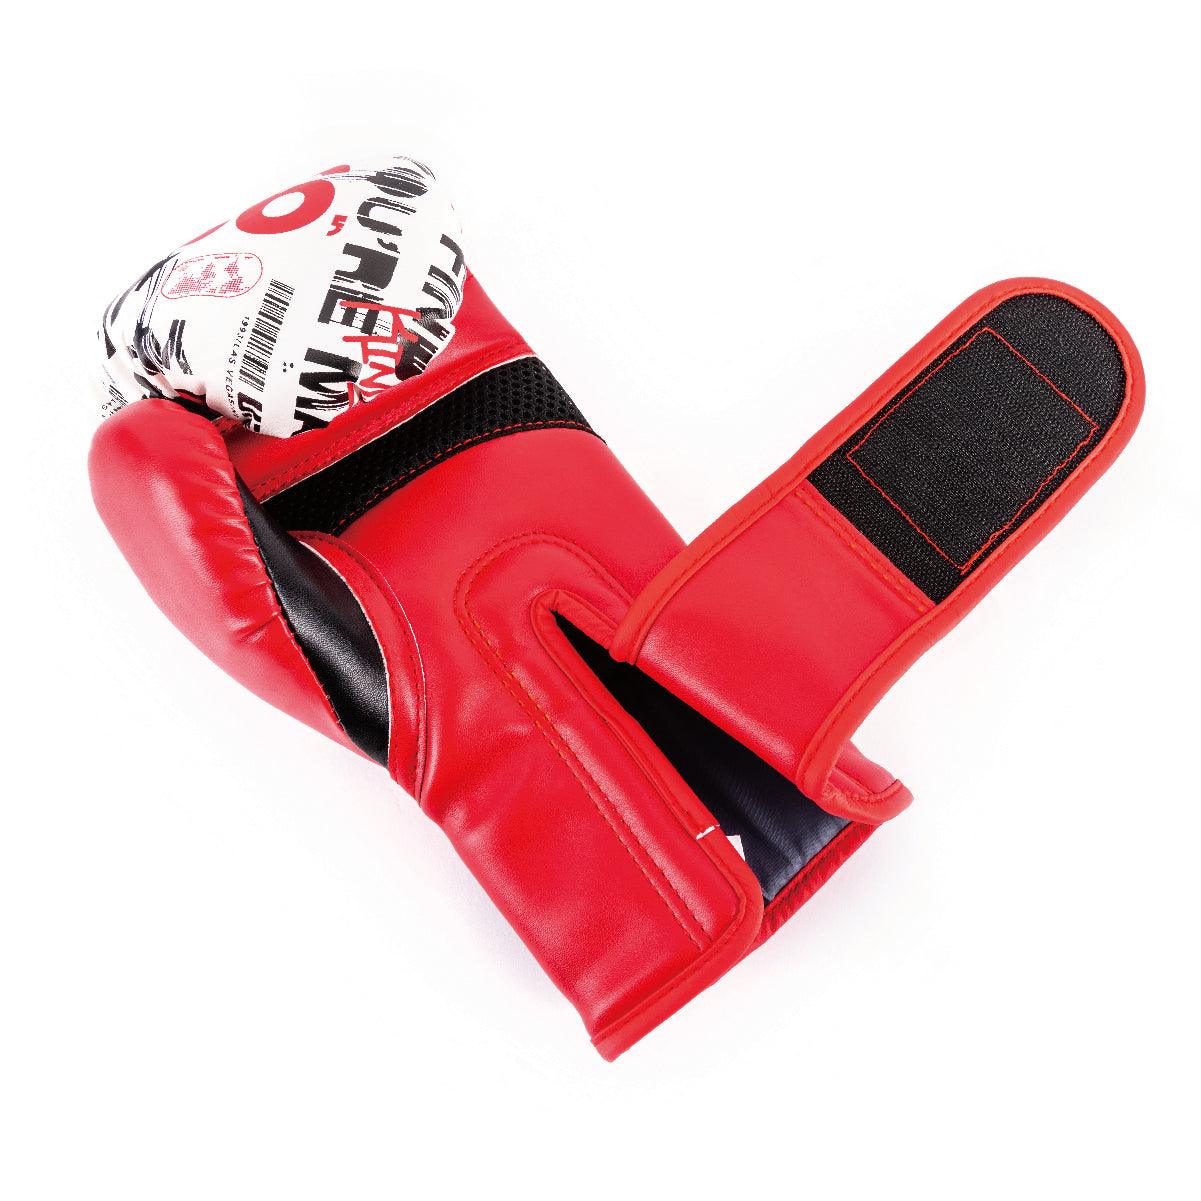 UFC "Made" Youth Boxing Glove - UFC Equipment MMA and Boxing Gear Spirit Combat Sports